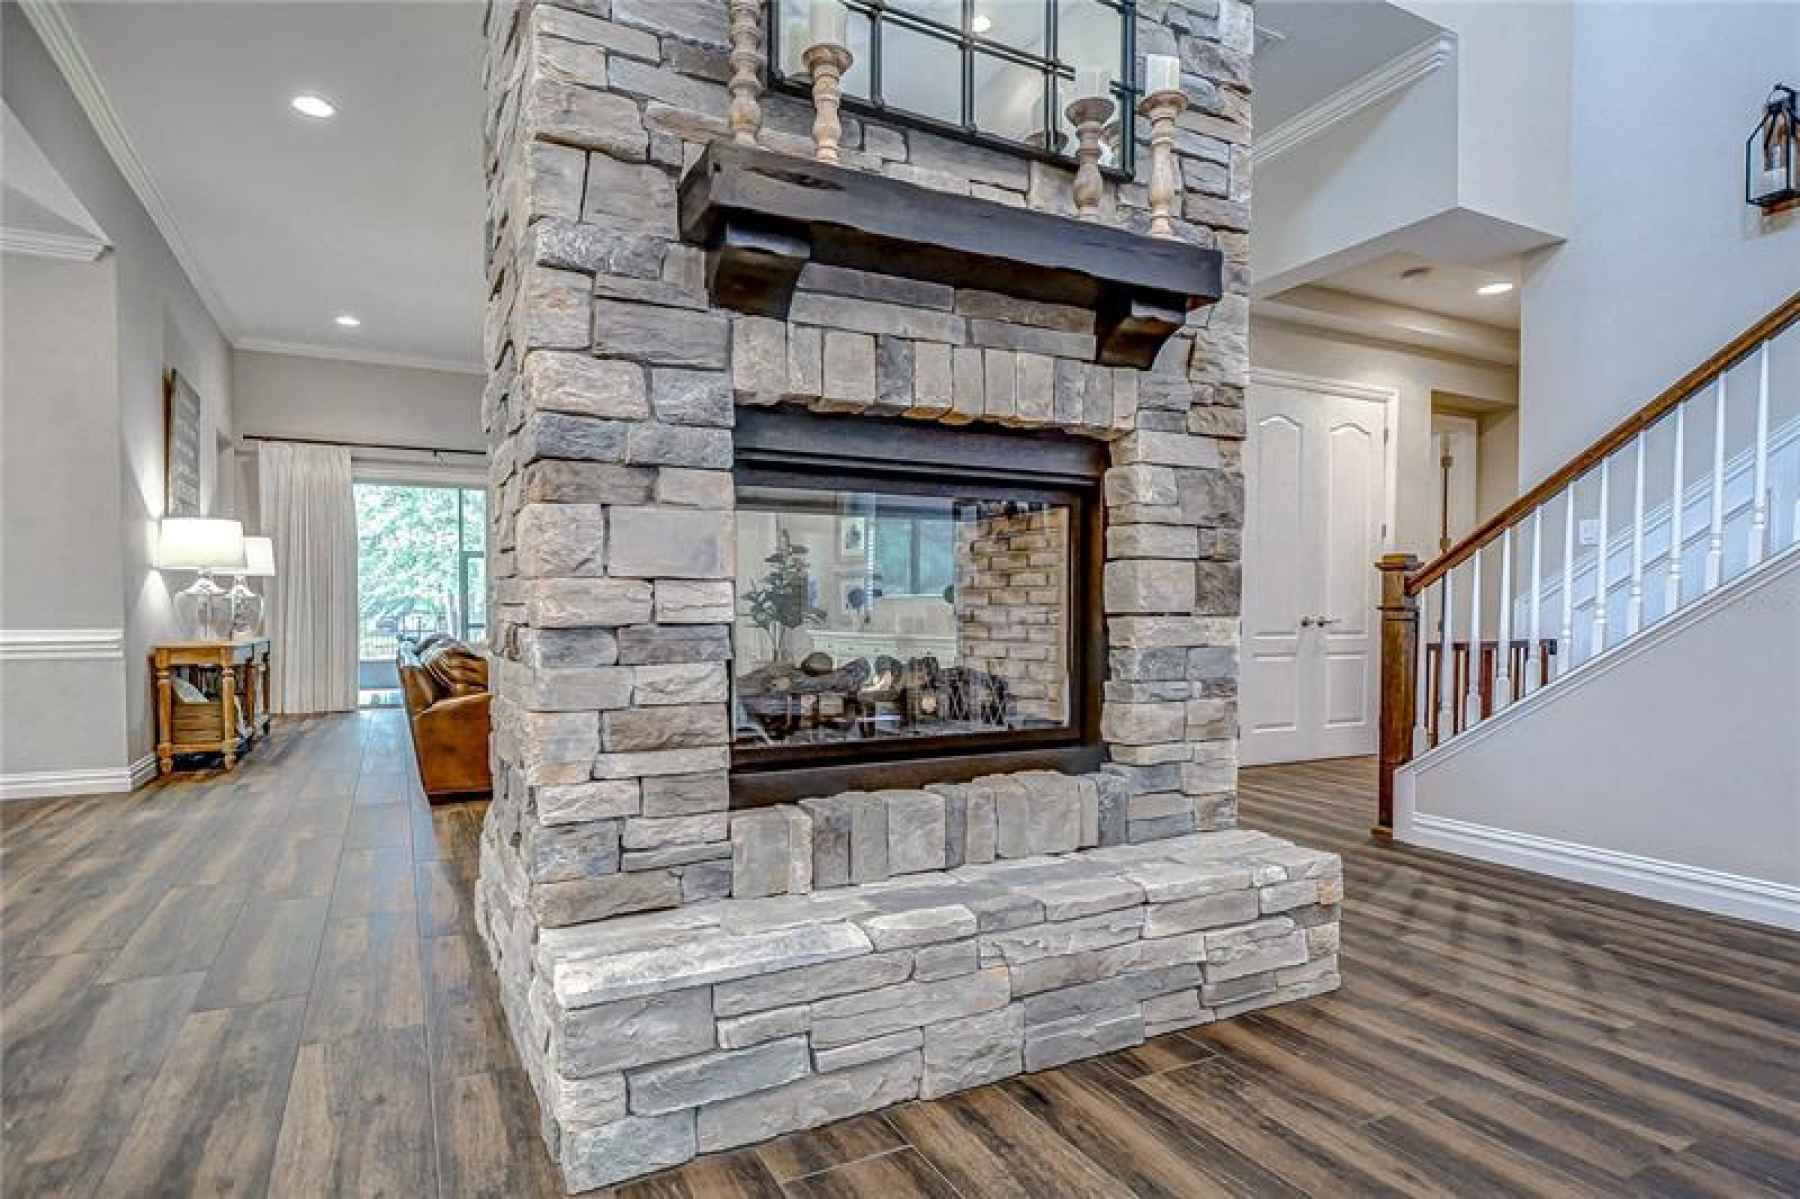 Move into the atrium and notice the statement double-sided gas fireplace with floor-to-ceiling stack